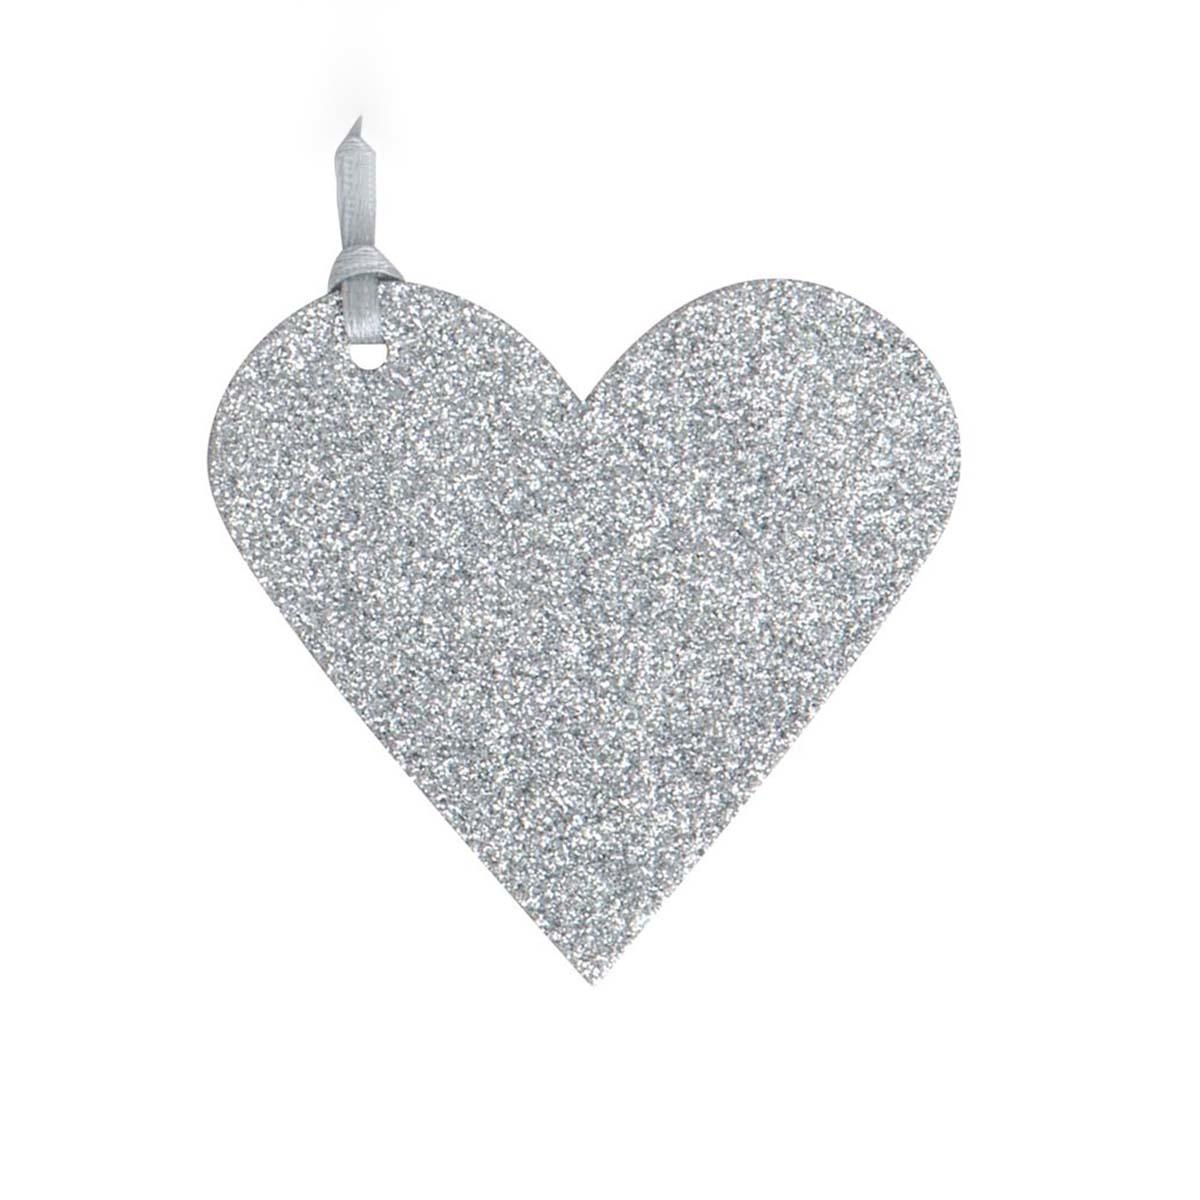 Single Silver Heart Shaped Gift tag Displayed In Full